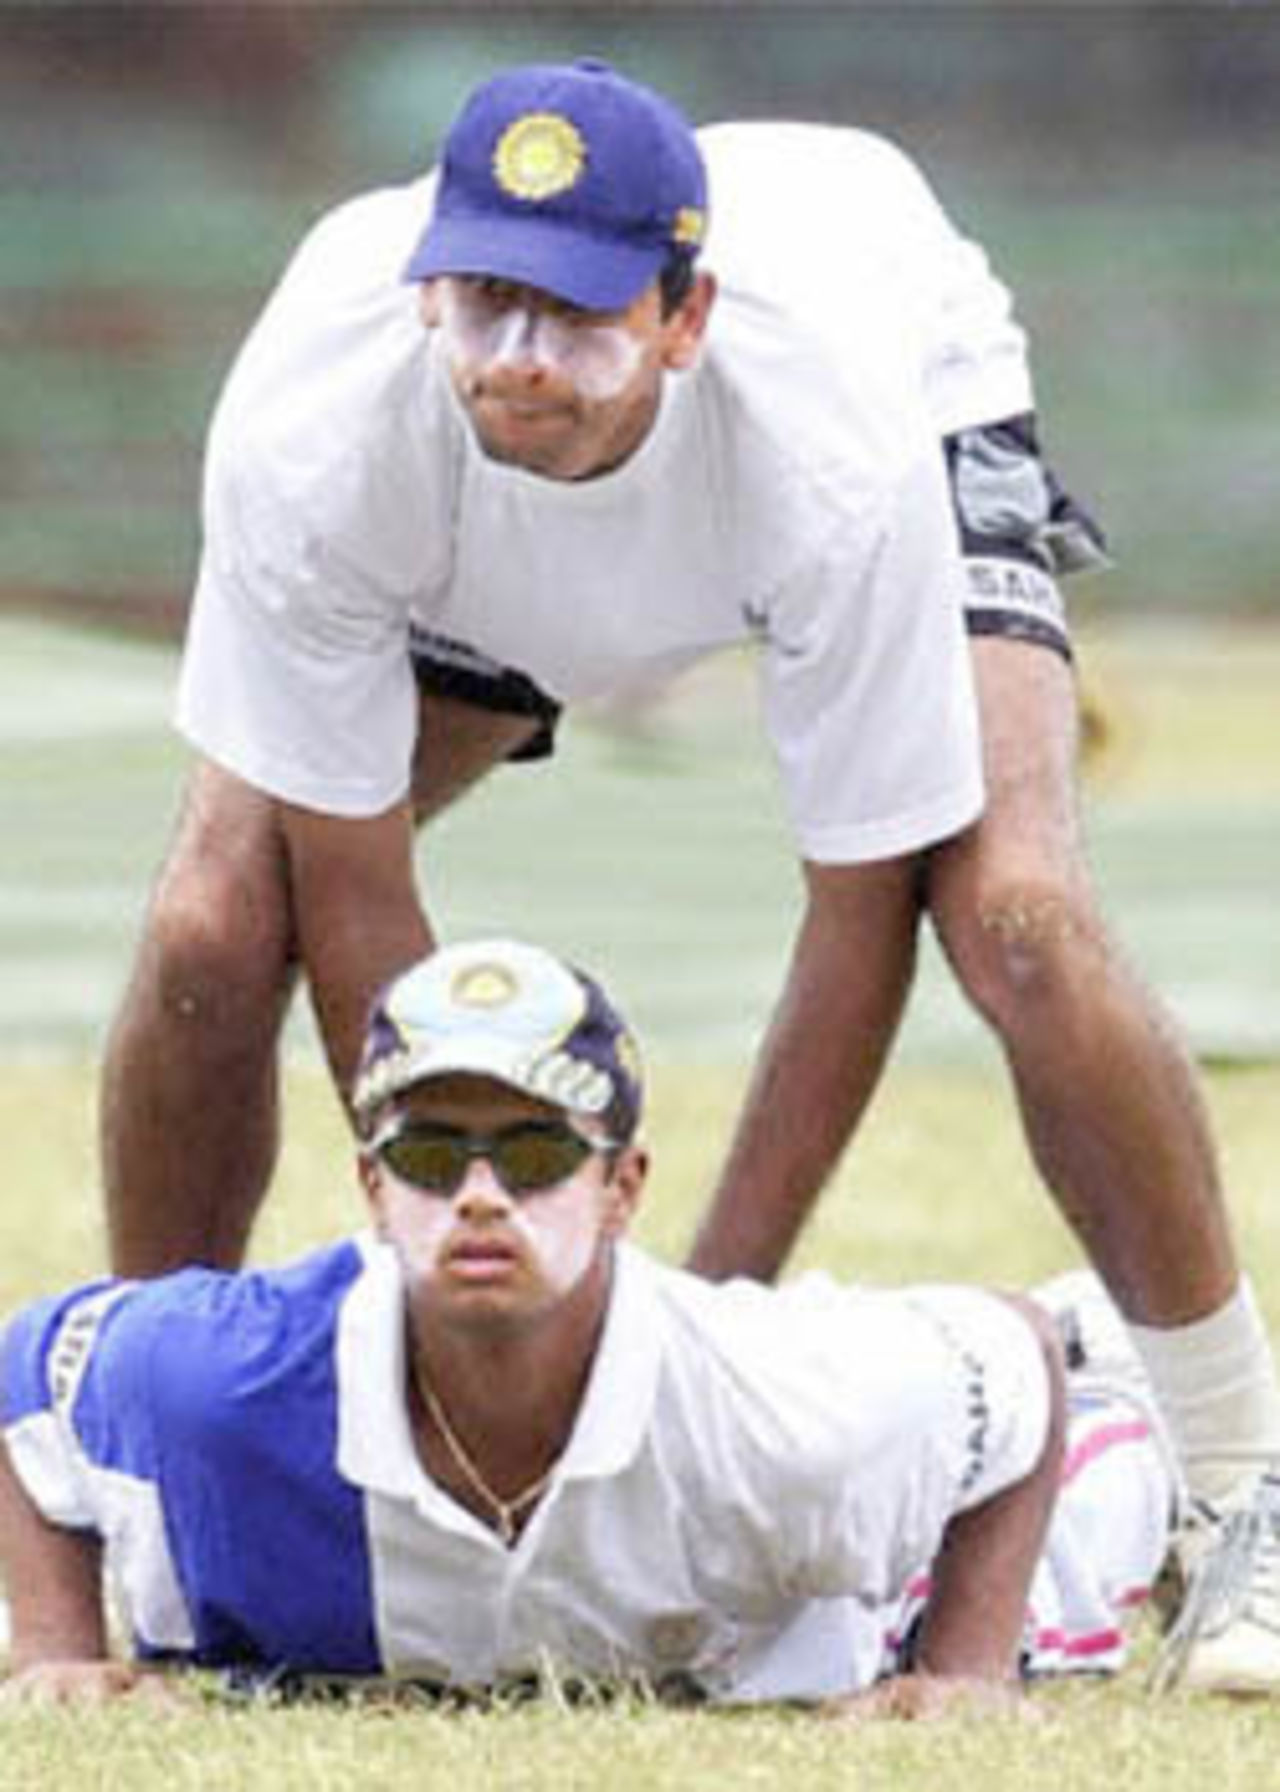 21 August 2001: India in Sri Lanka, Practice Session at the Asgiriya Cricket Stadium in Kandy before the 2nd Test